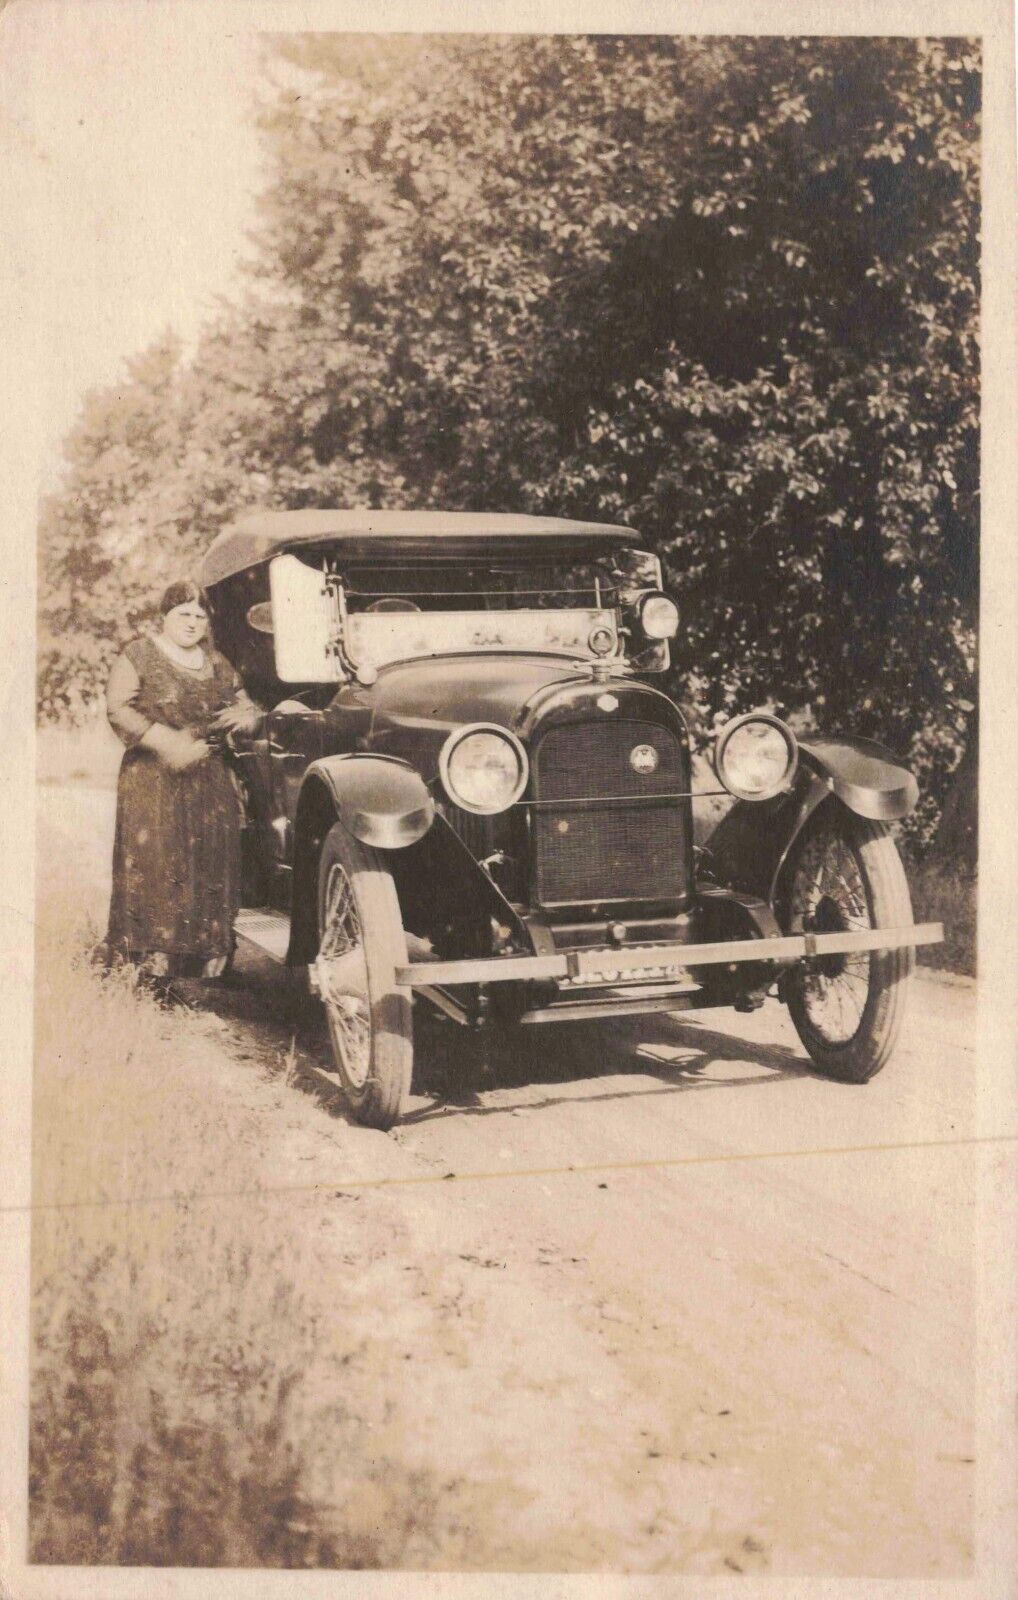 RPPC Woman Stands Next to Antique Car on Dirt Road Real Photo Vintage Postcard